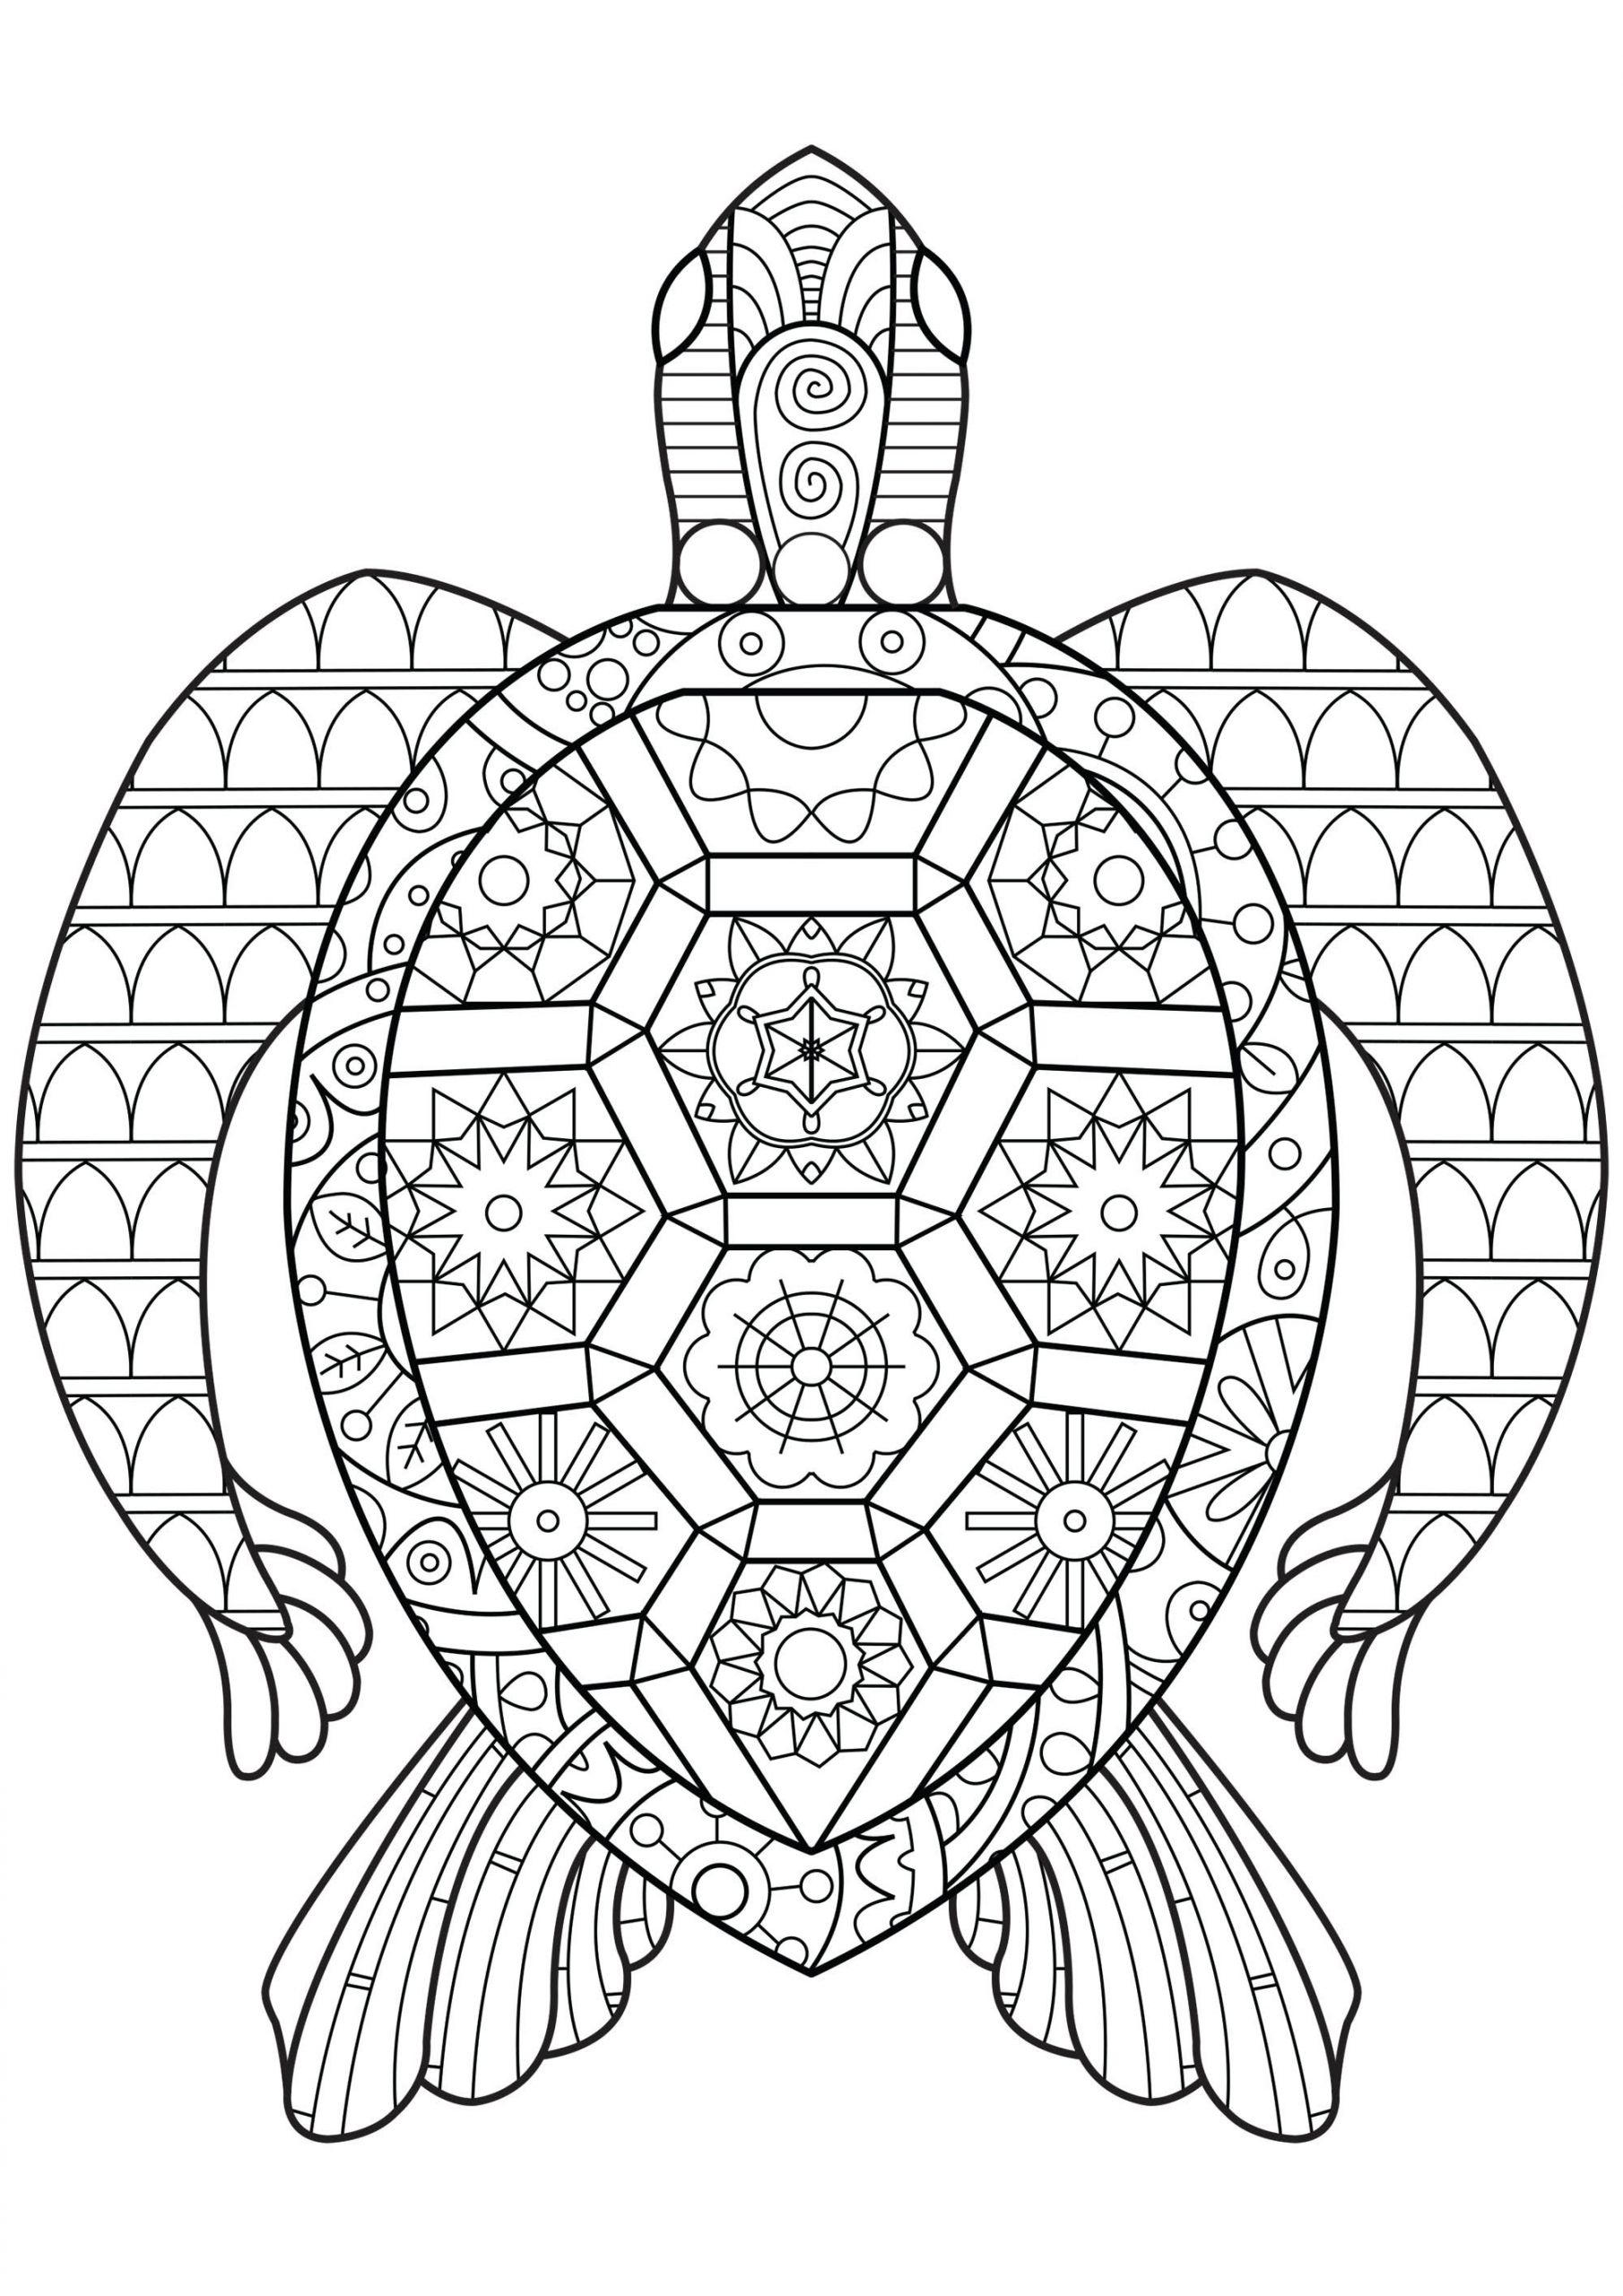 Turtle Coloring Pages For Adults
 Zen Turtle Turtles Adult Coloring Pages